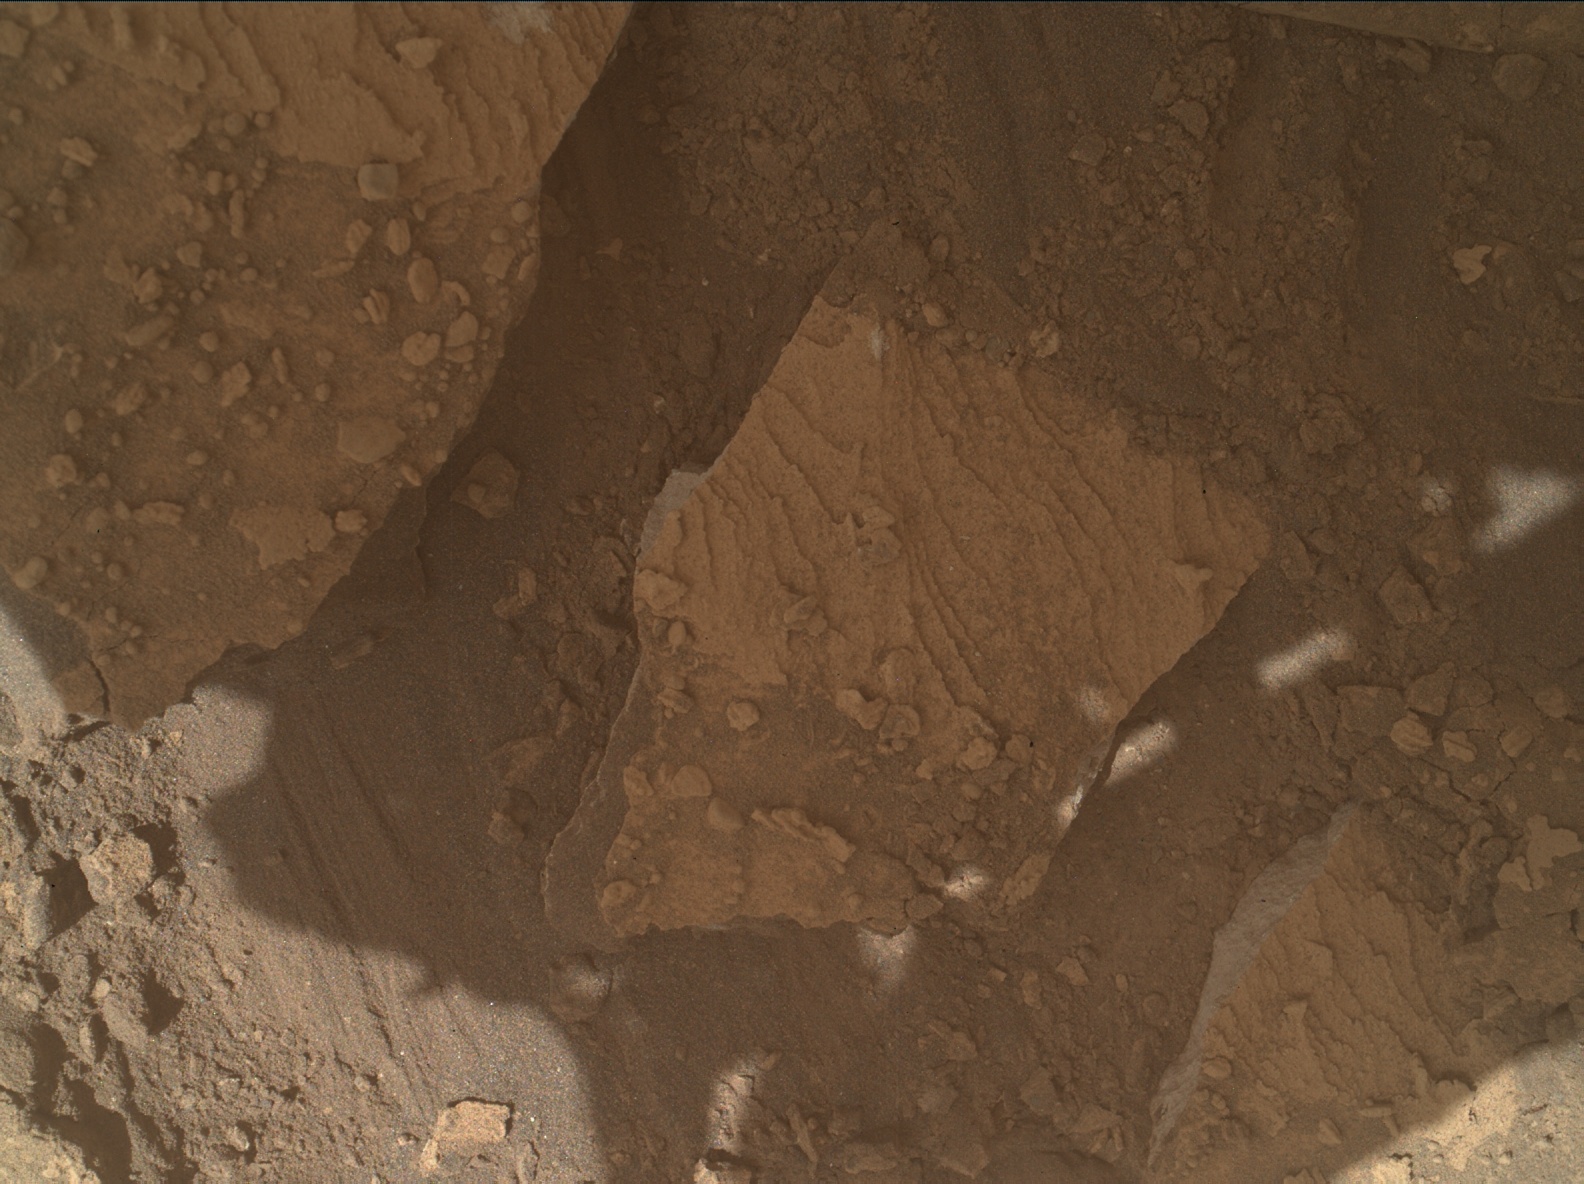 Nasa's Mars rover Curiosity acquired this image using its Mars Hand Lens Imager (MAHLI) on Sol 3853